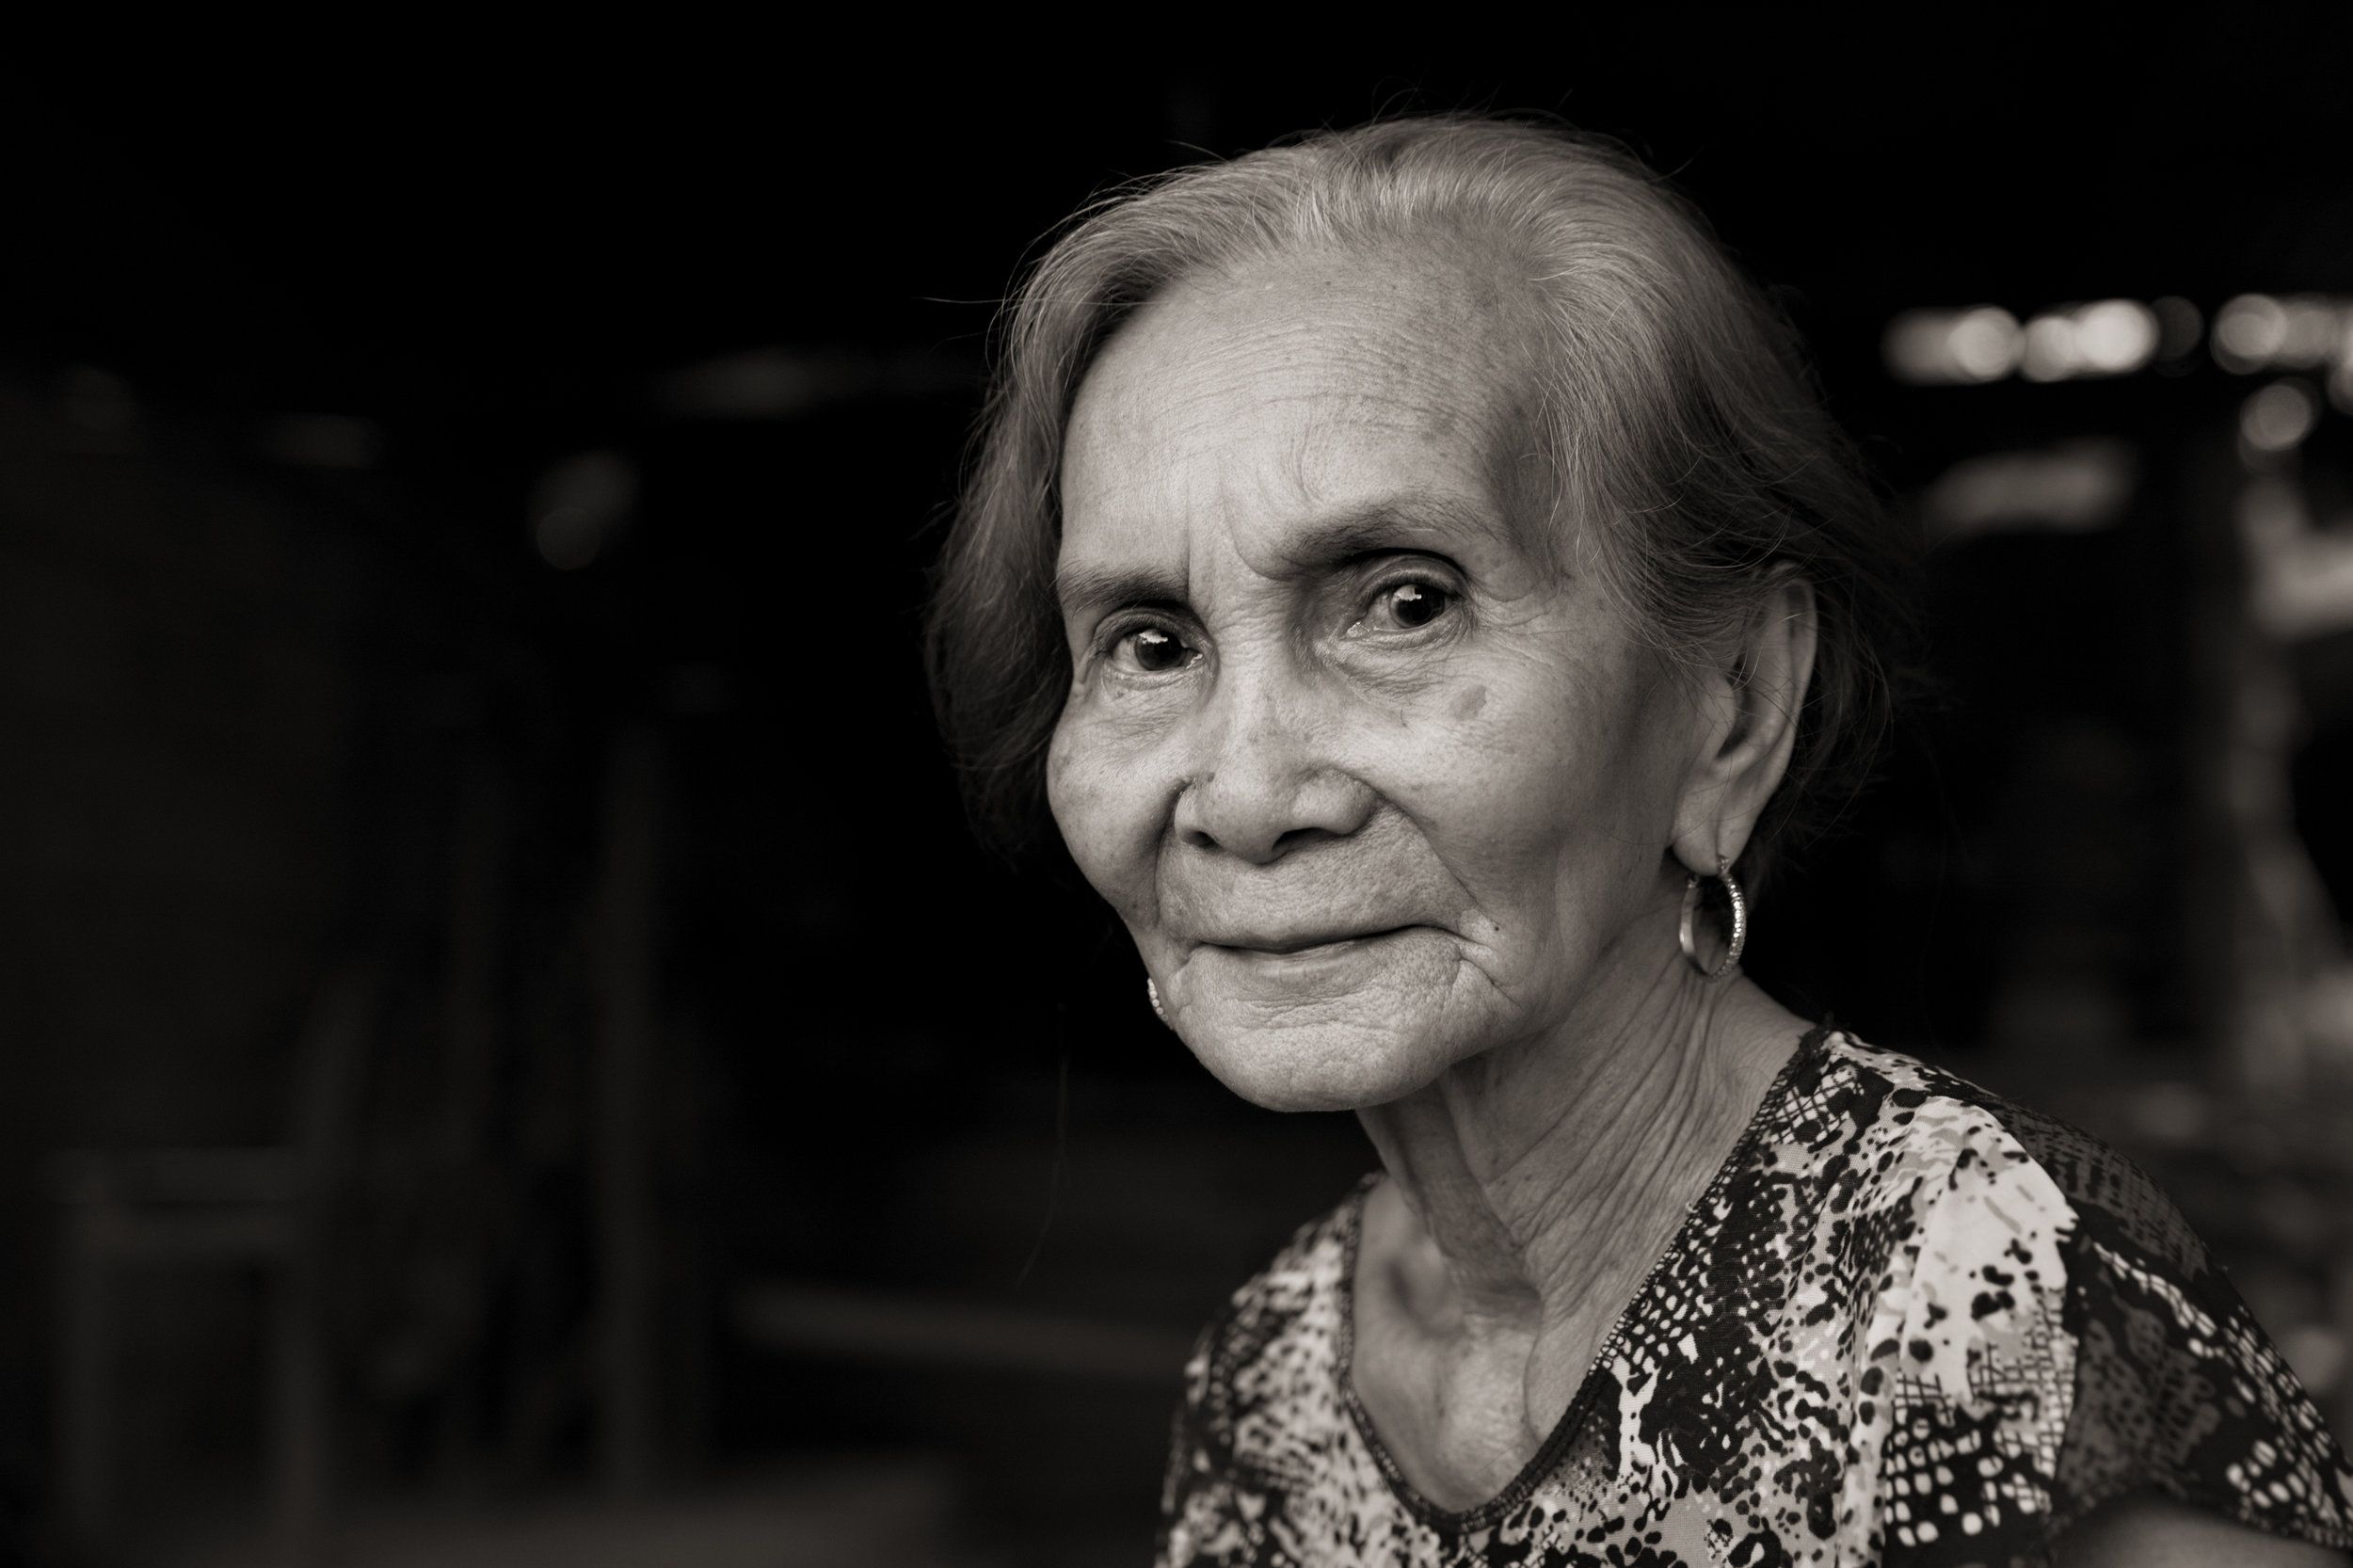 Januaria Galang Garcia is frail and suffers from dementia. On Nov. 23, 1944, she and her mother were among the more than 100 girls and women raped by Japanese soldiers. Garcia was 14. She would later marry and have eight children. Image by Cheryl Diaz Meyer. Philippines, 2019.